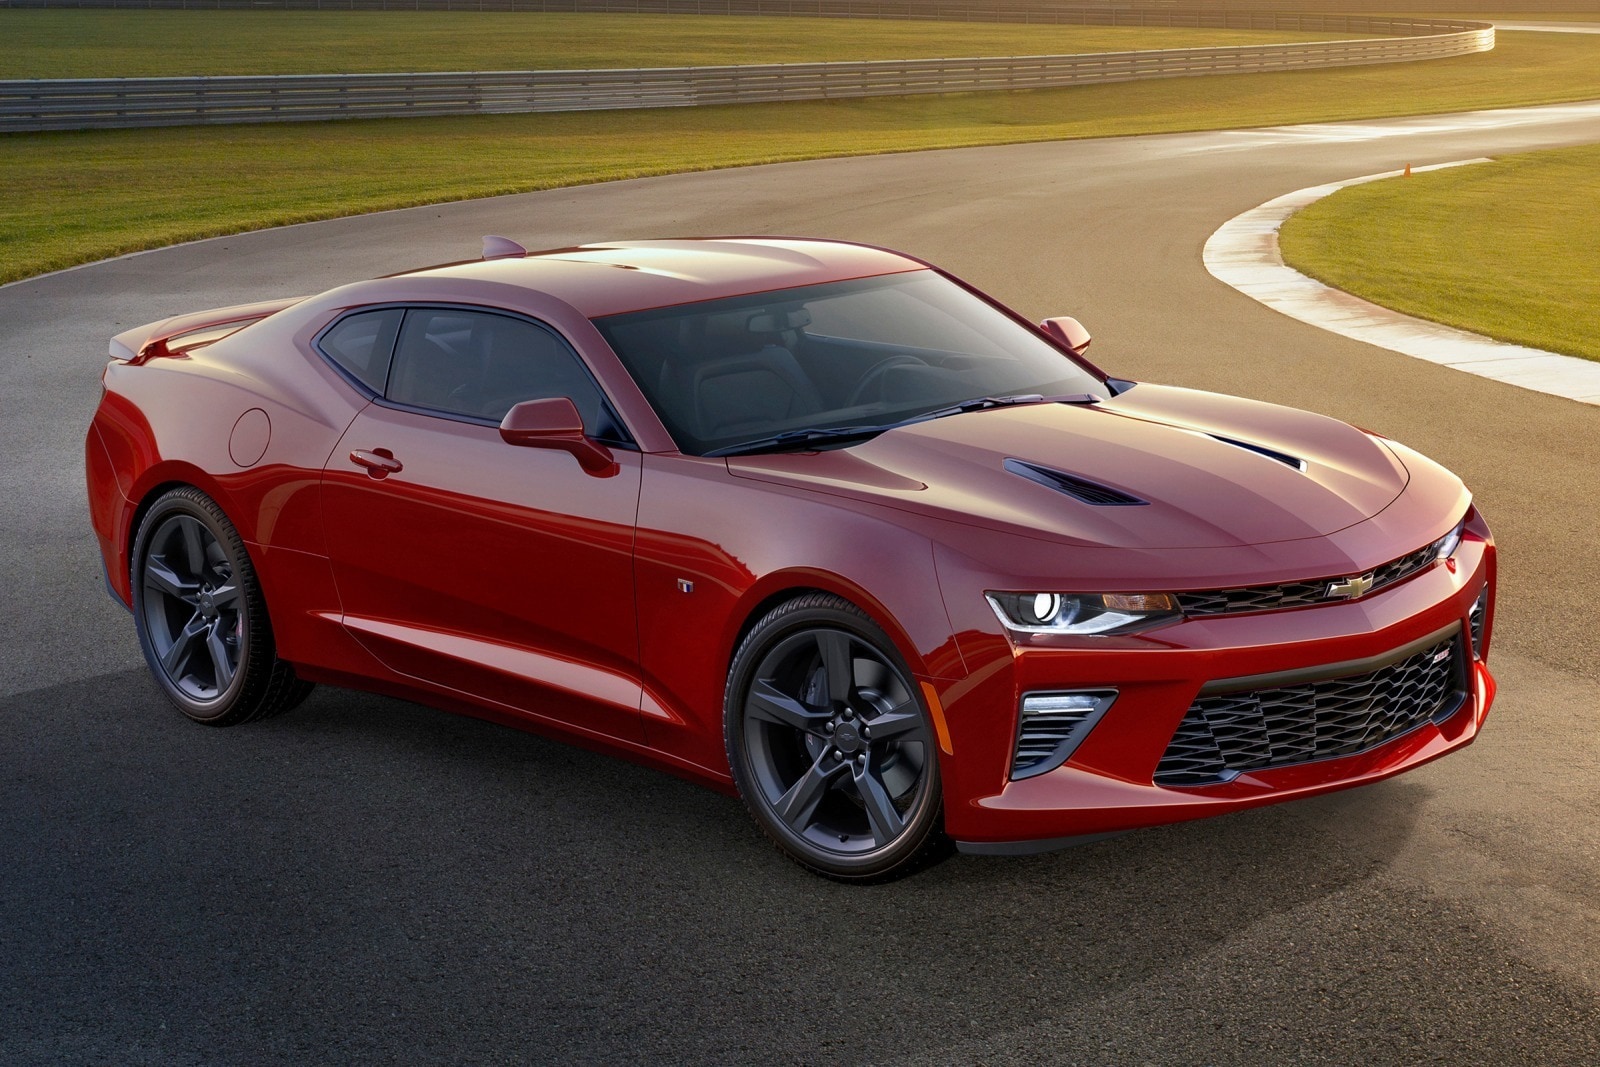 2016 Chevrolet Camaro Can Be Customized With Performance Parts Edmunds